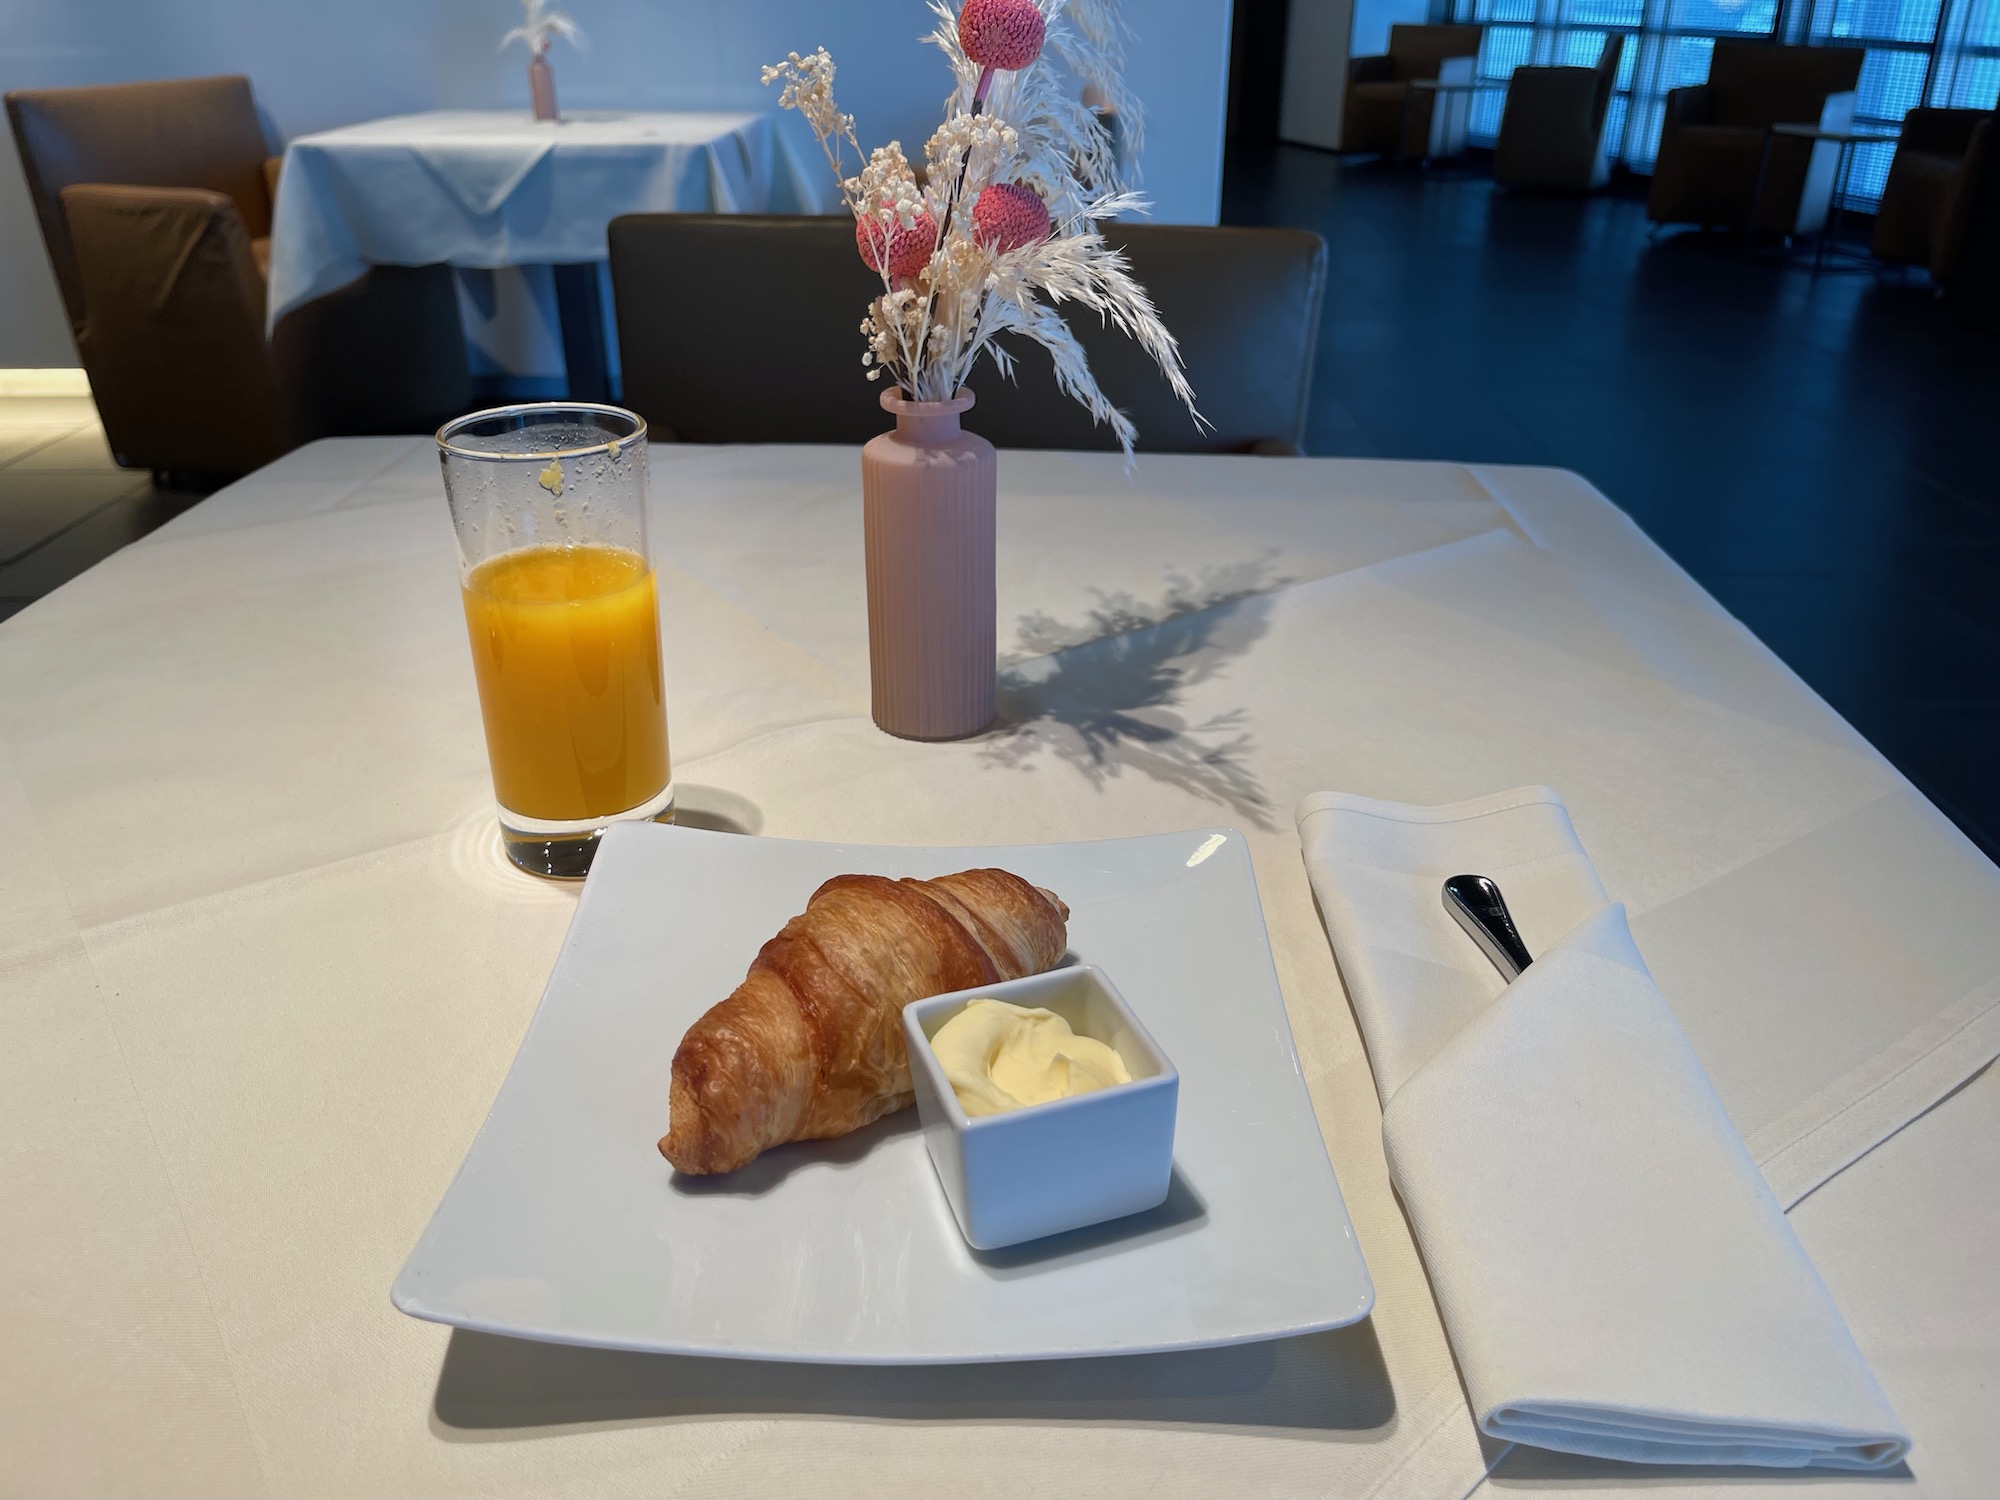 a plate of croissant and butter on a table